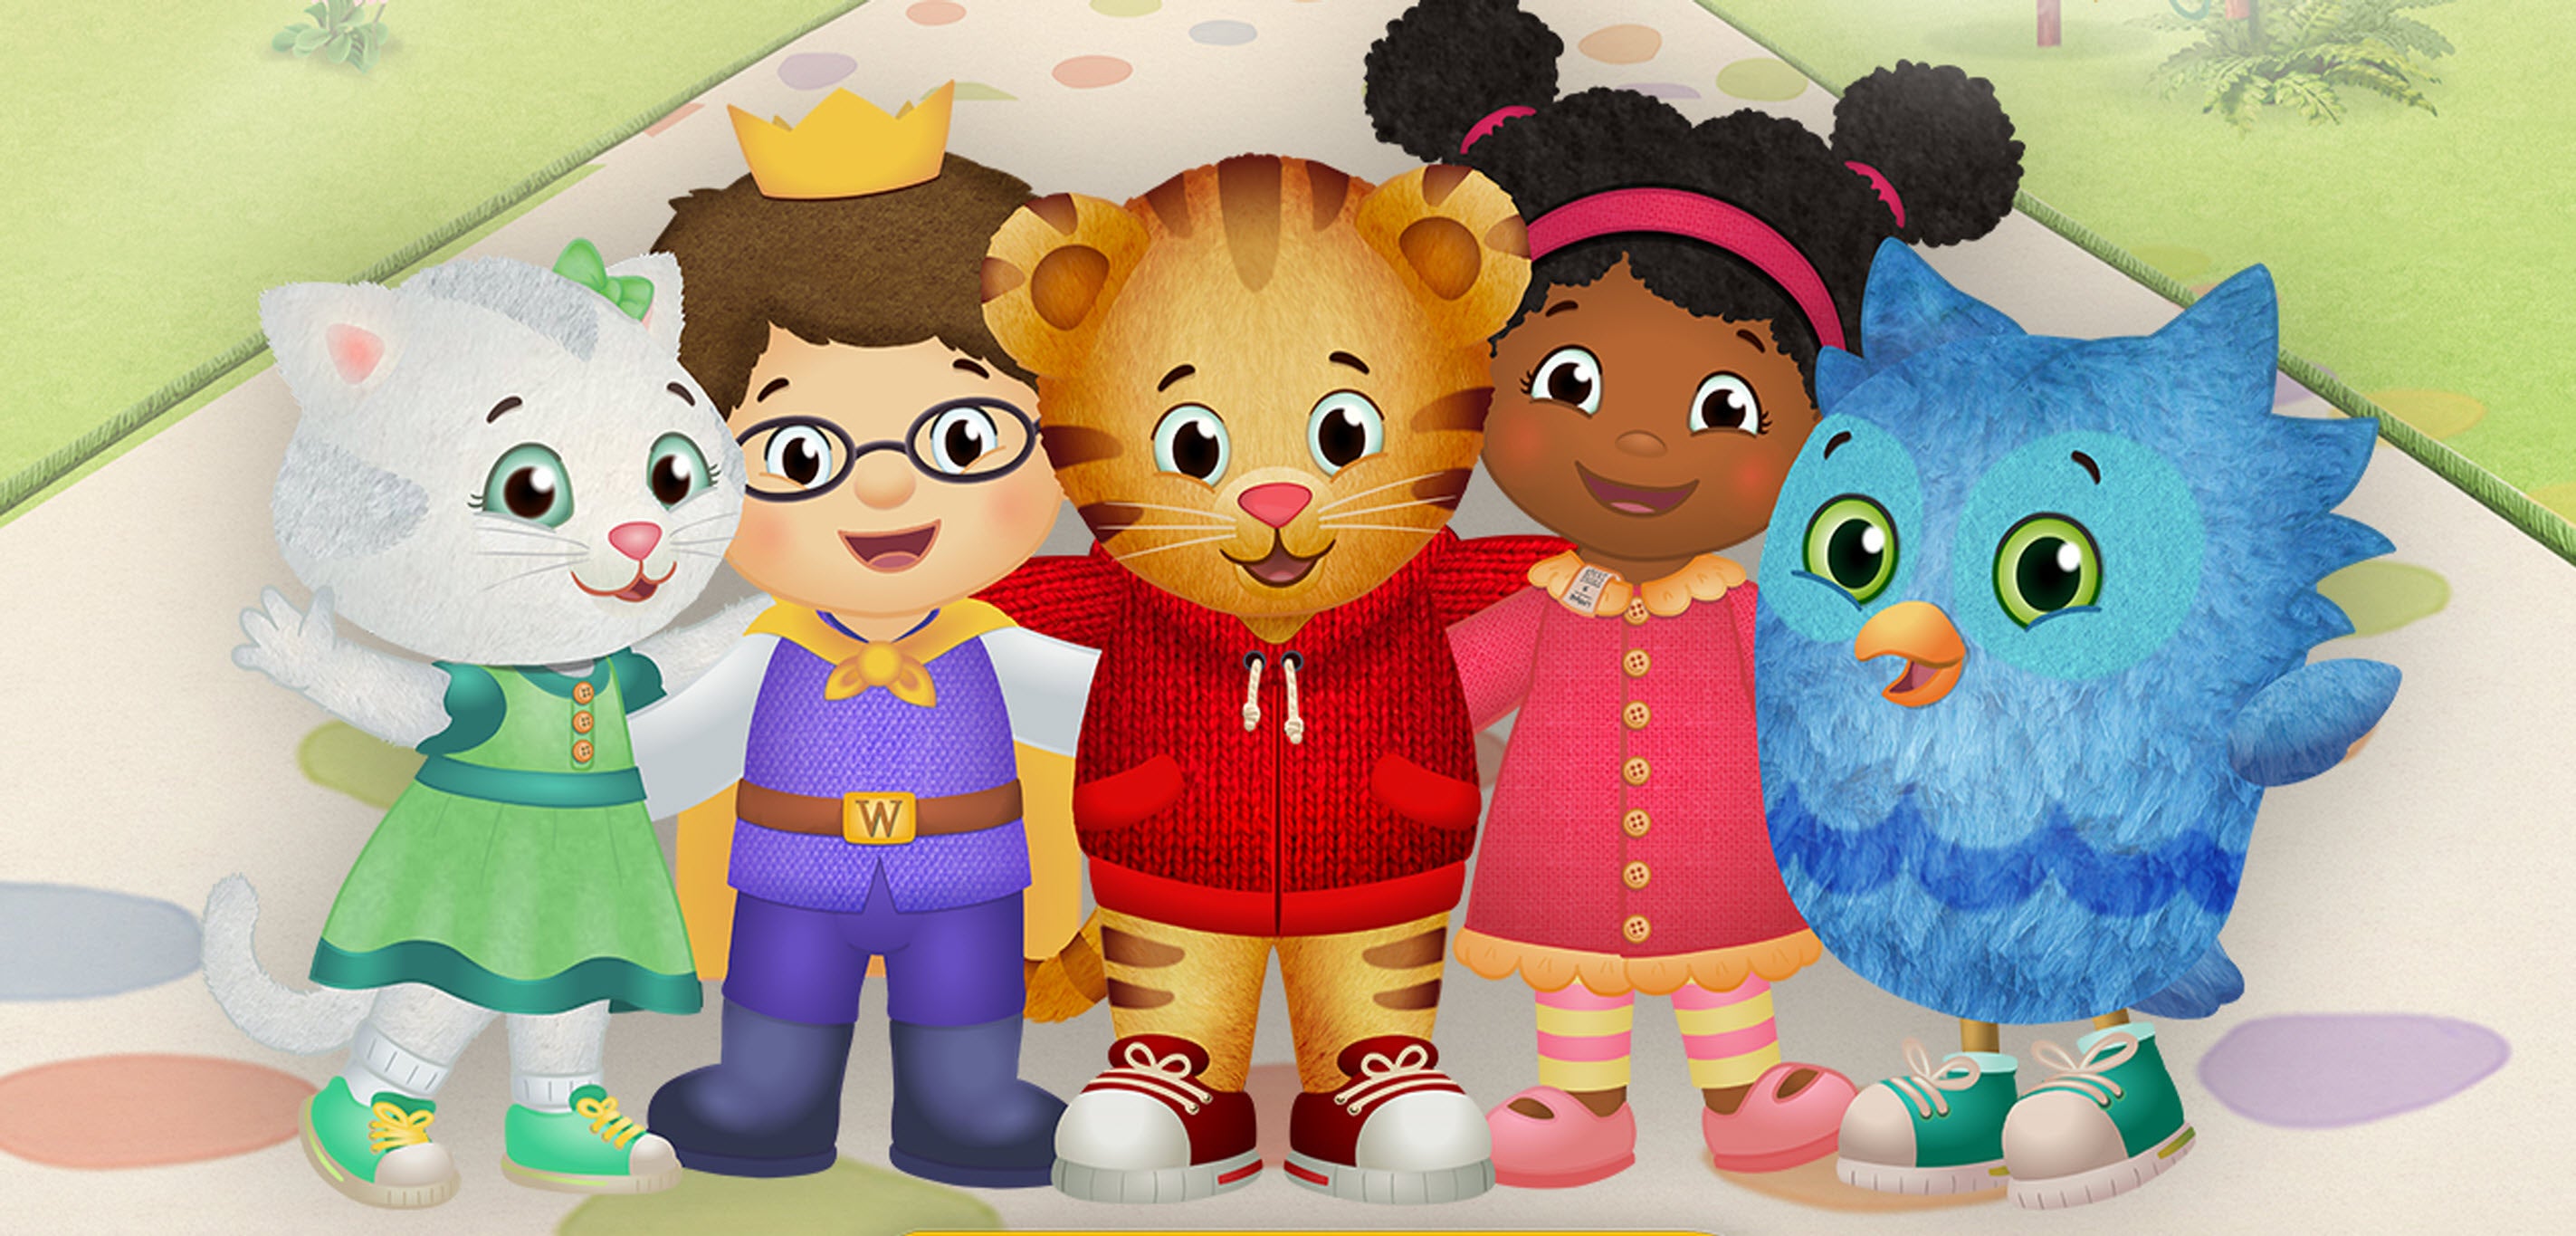 Daniel Tiger's Neighborhood Live! : King For A Day in Cincinnati promo photo for VIP Package presale offer code